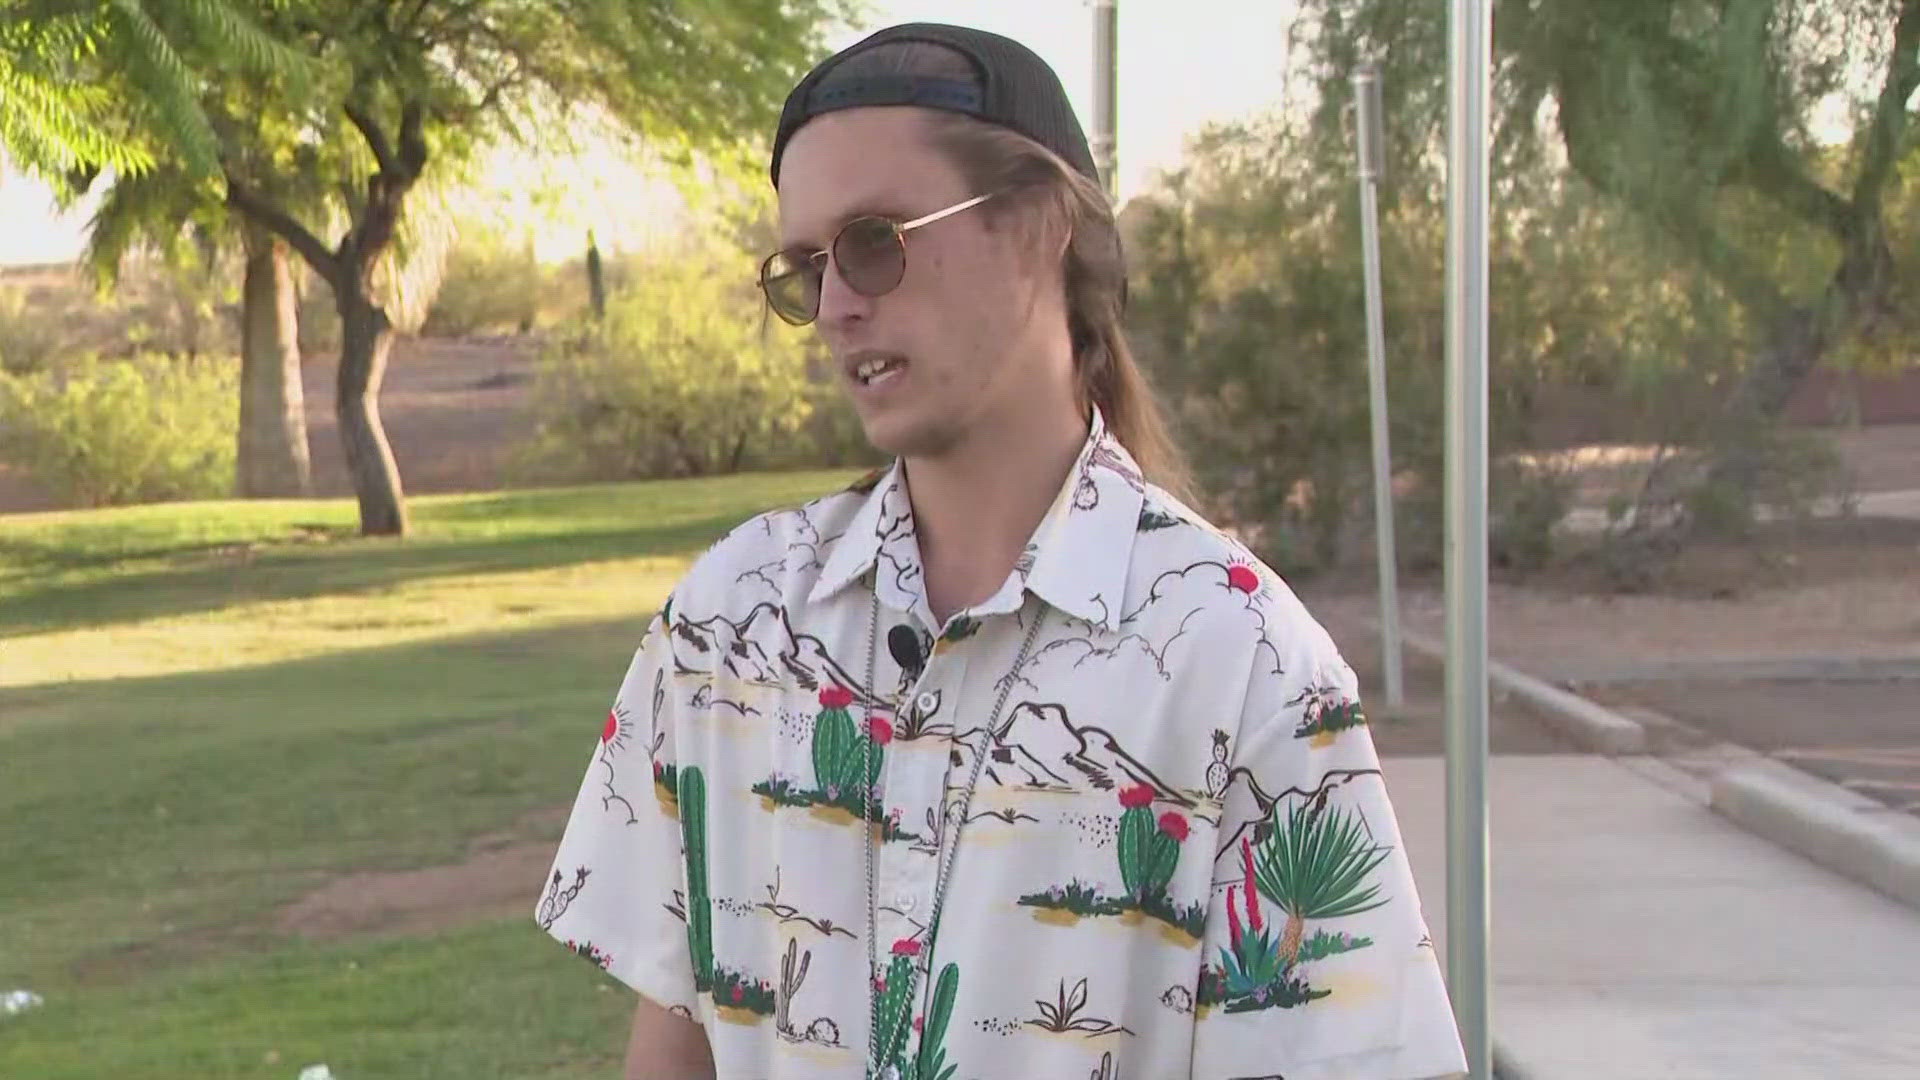 The City of Tempe is saying a man who offers picnic meals to people who are homeless is not allowed to do so.